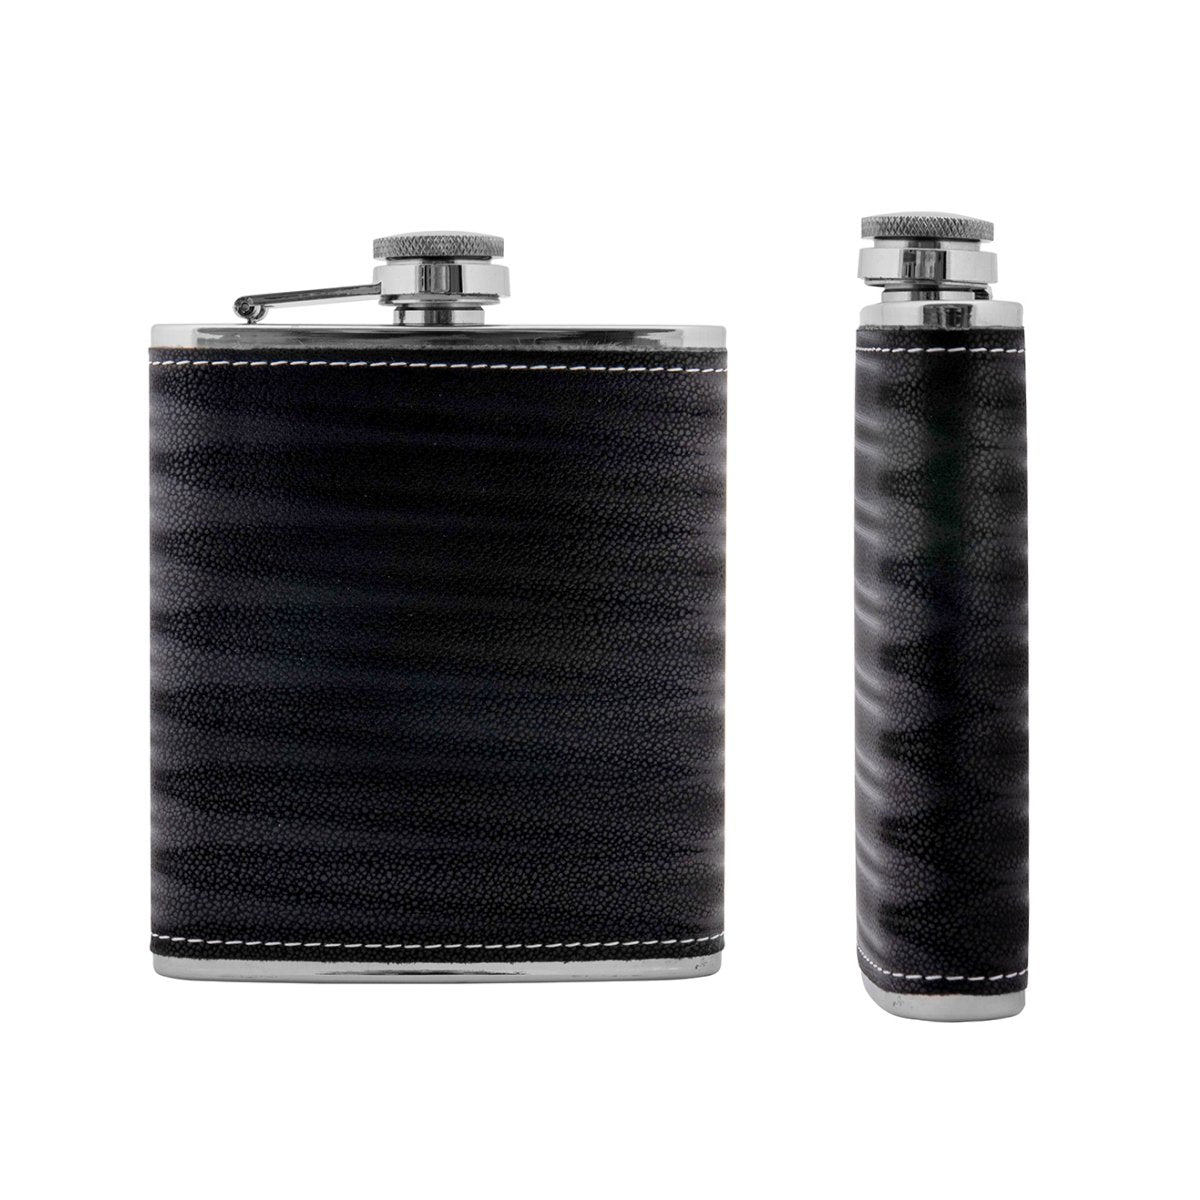 7 oz Black Stainless Steel Liquor Hip Flask for Strong Alcohol